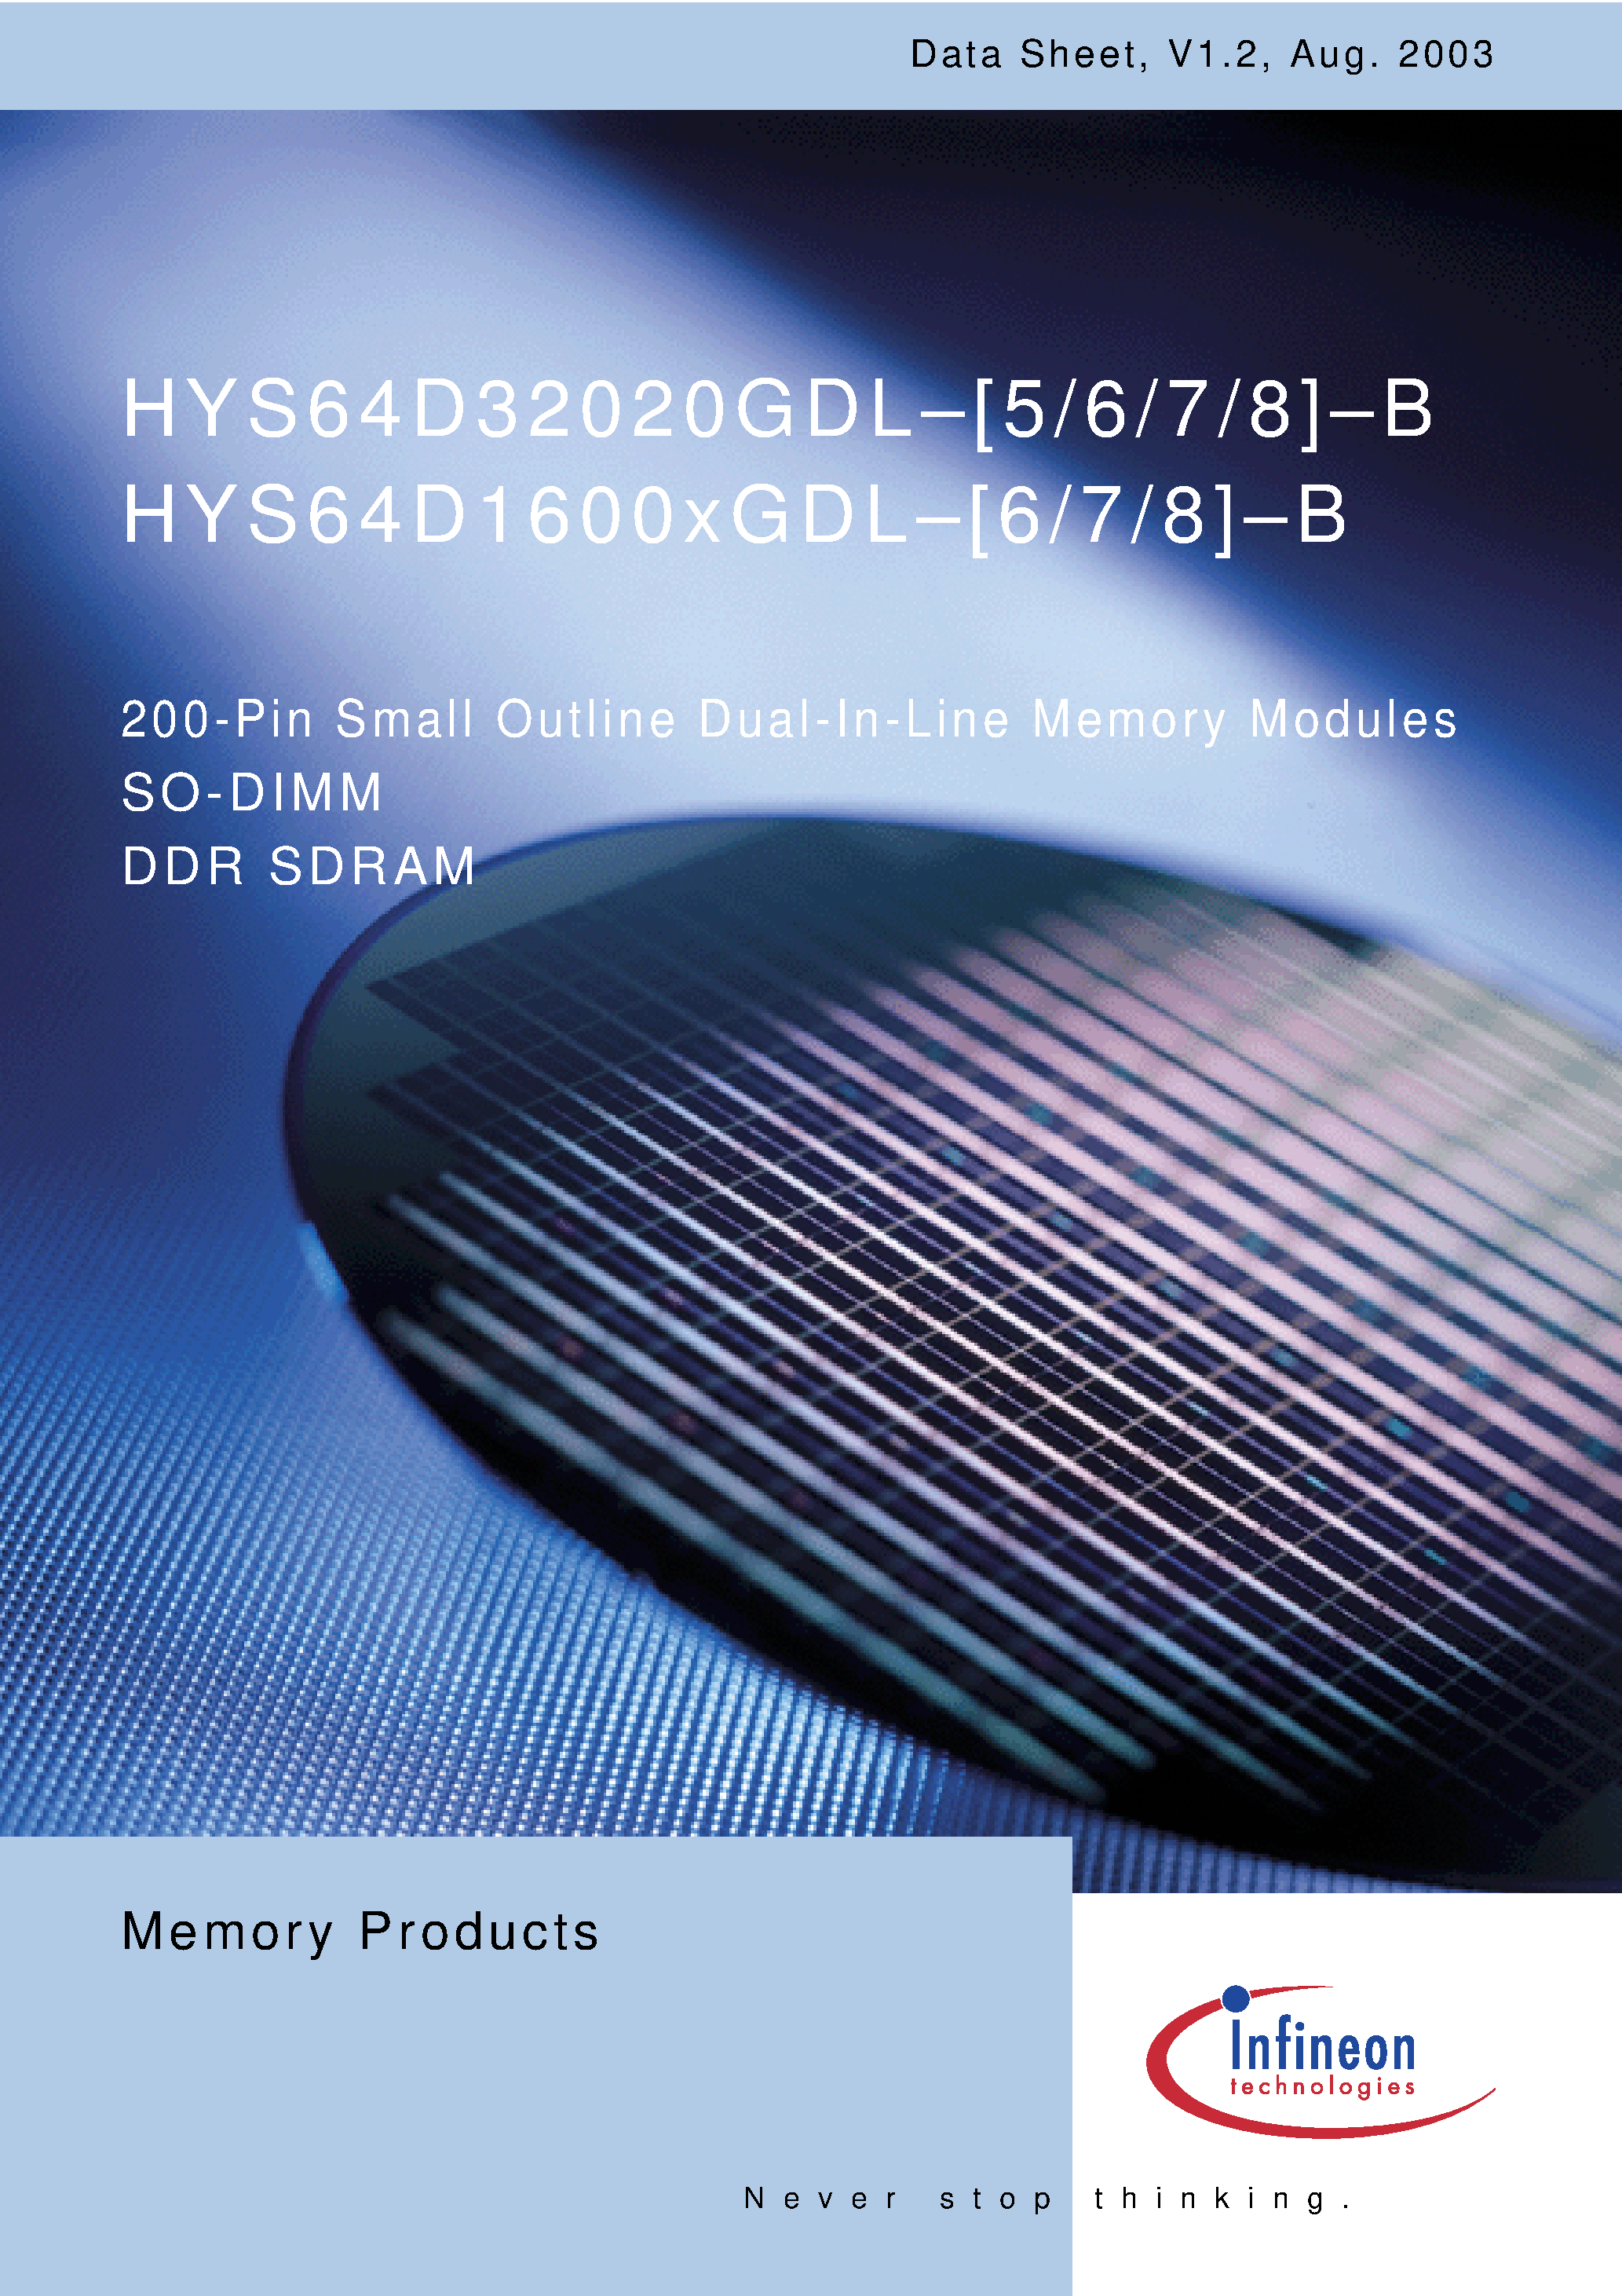 Datasheet HYS64D16000GDL-6-B - 200-Pin Small Outline Dual-In-Line Memory Modules page 1